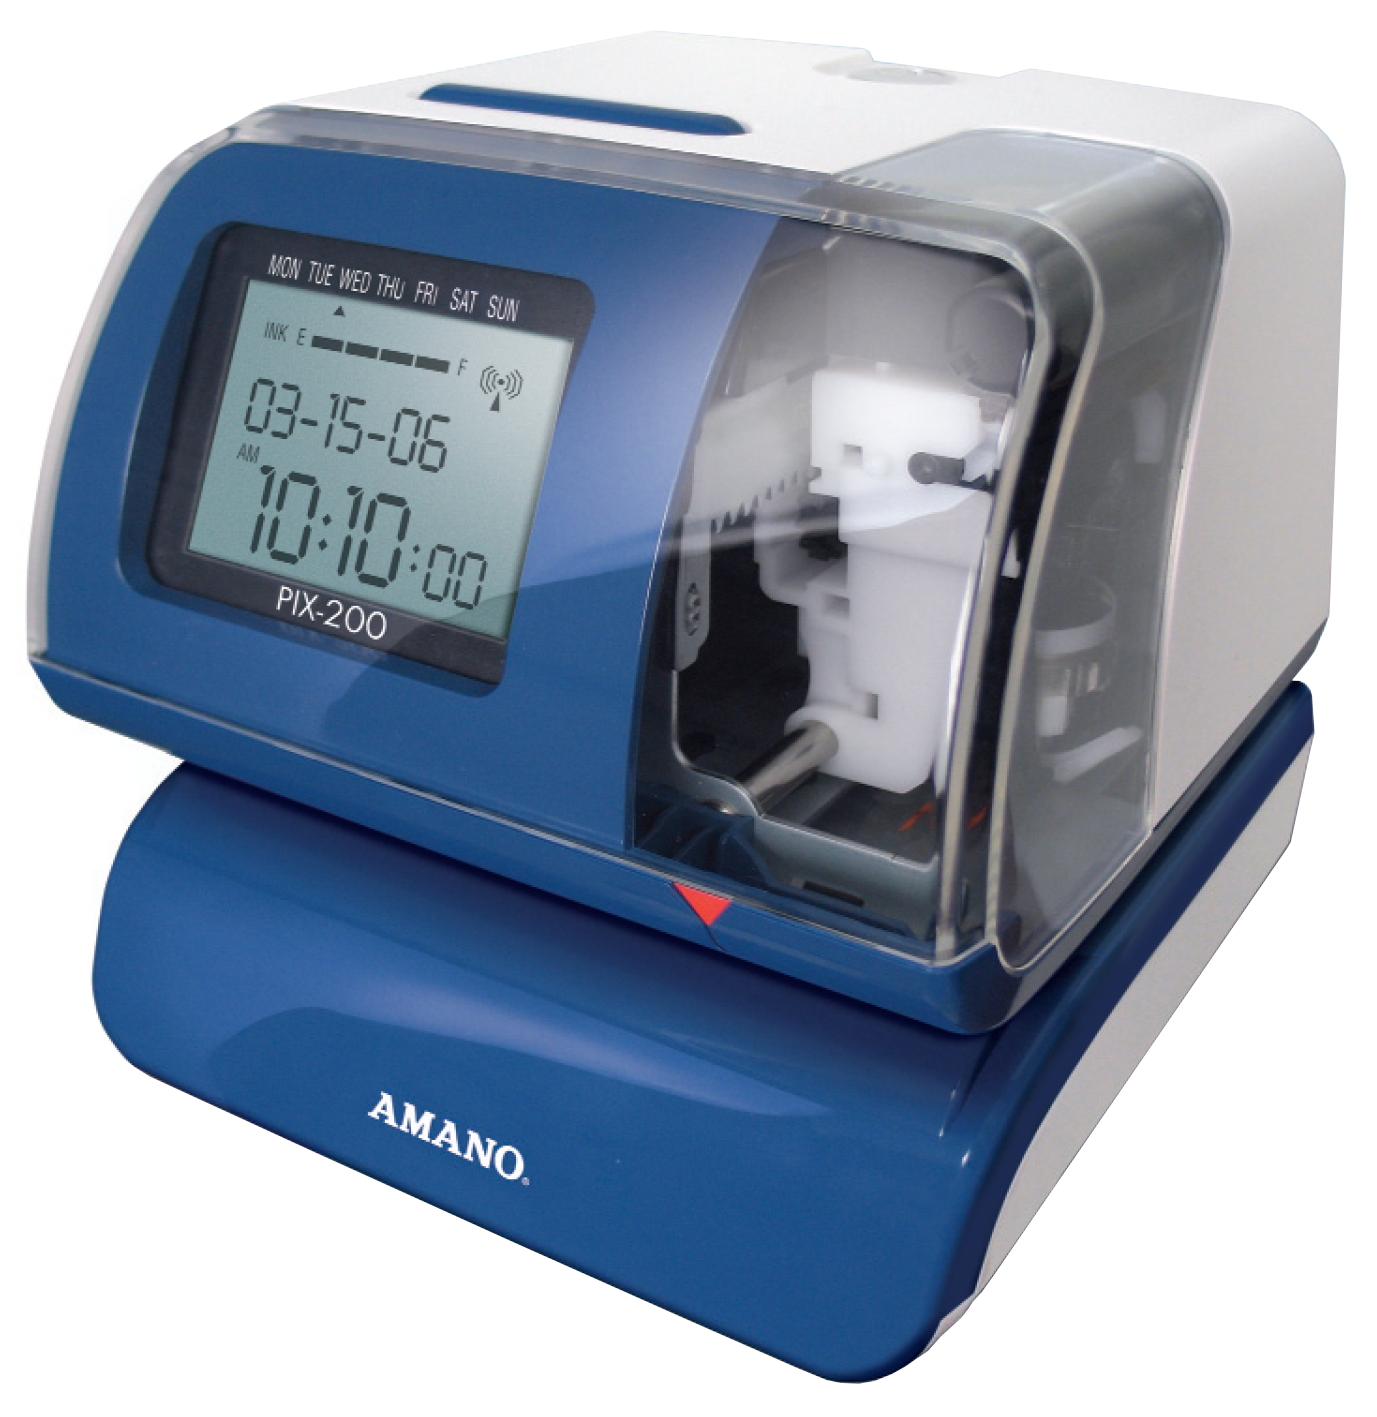 Amano PIX-200 Time Clock and Date Stamp